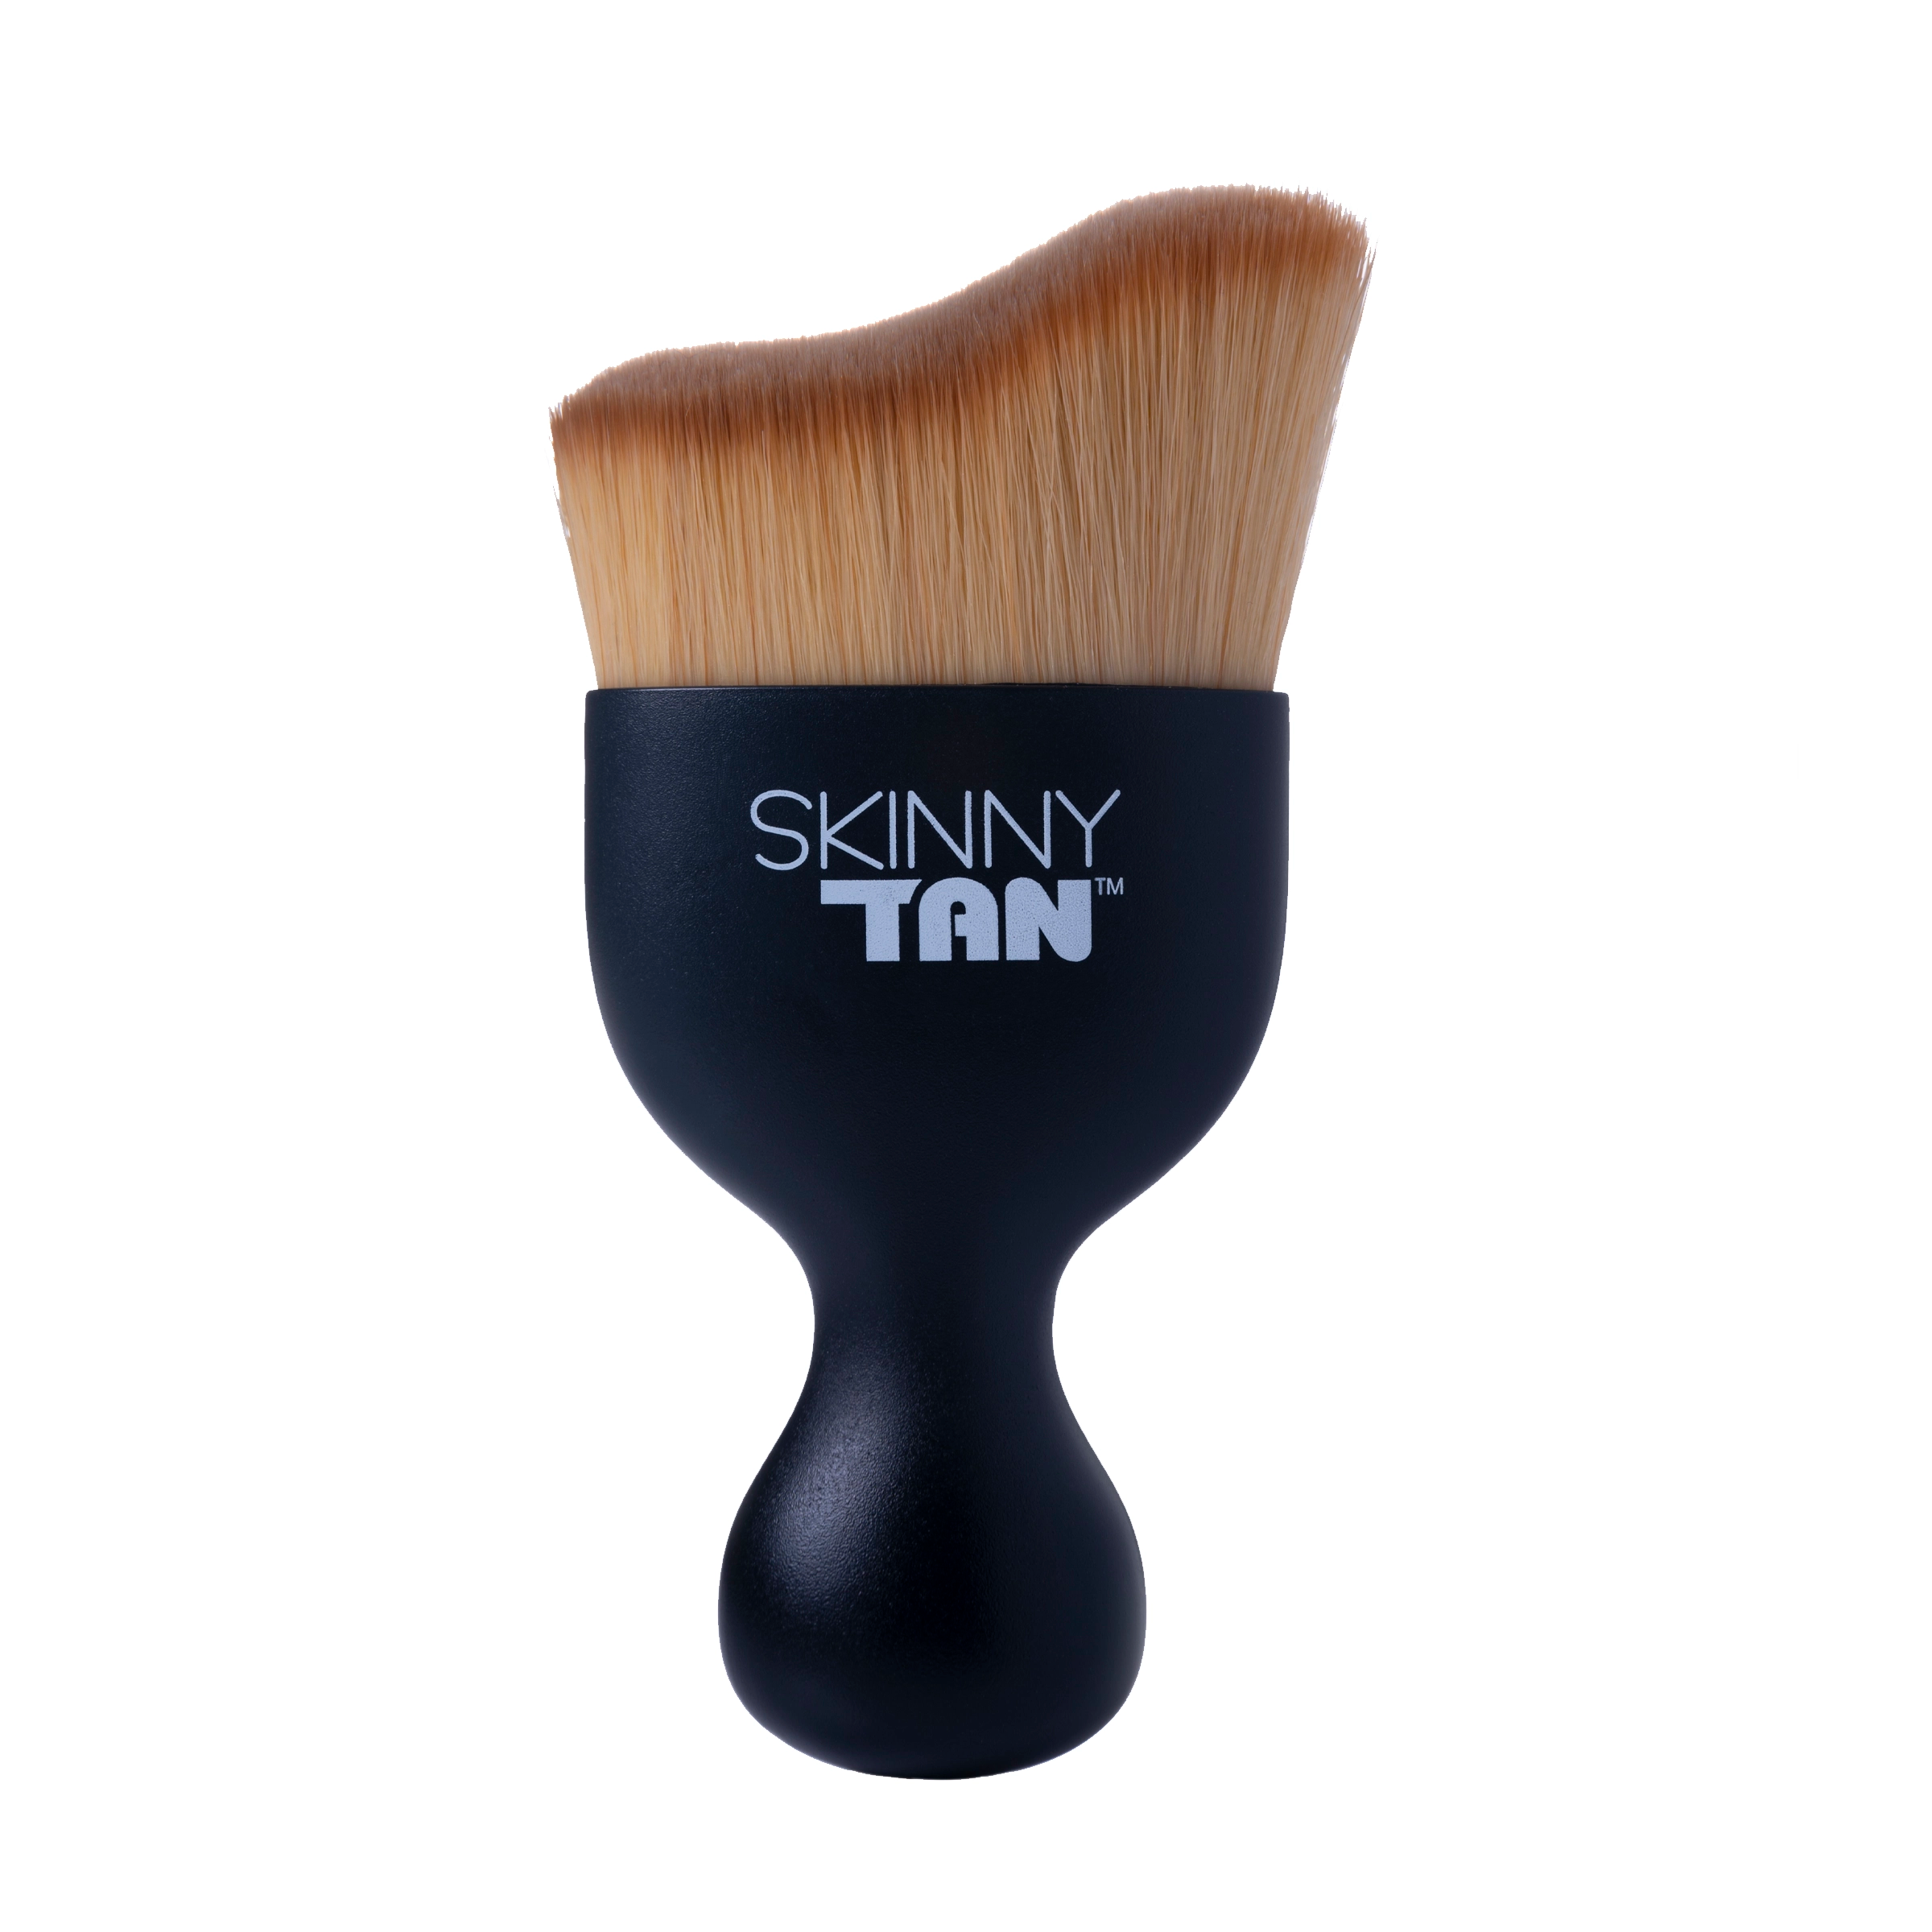 Skinny Tan Miracle Tanning Application Brush Ultra Soft Tanning Brush For Blending In Smaller, Tricky Areas